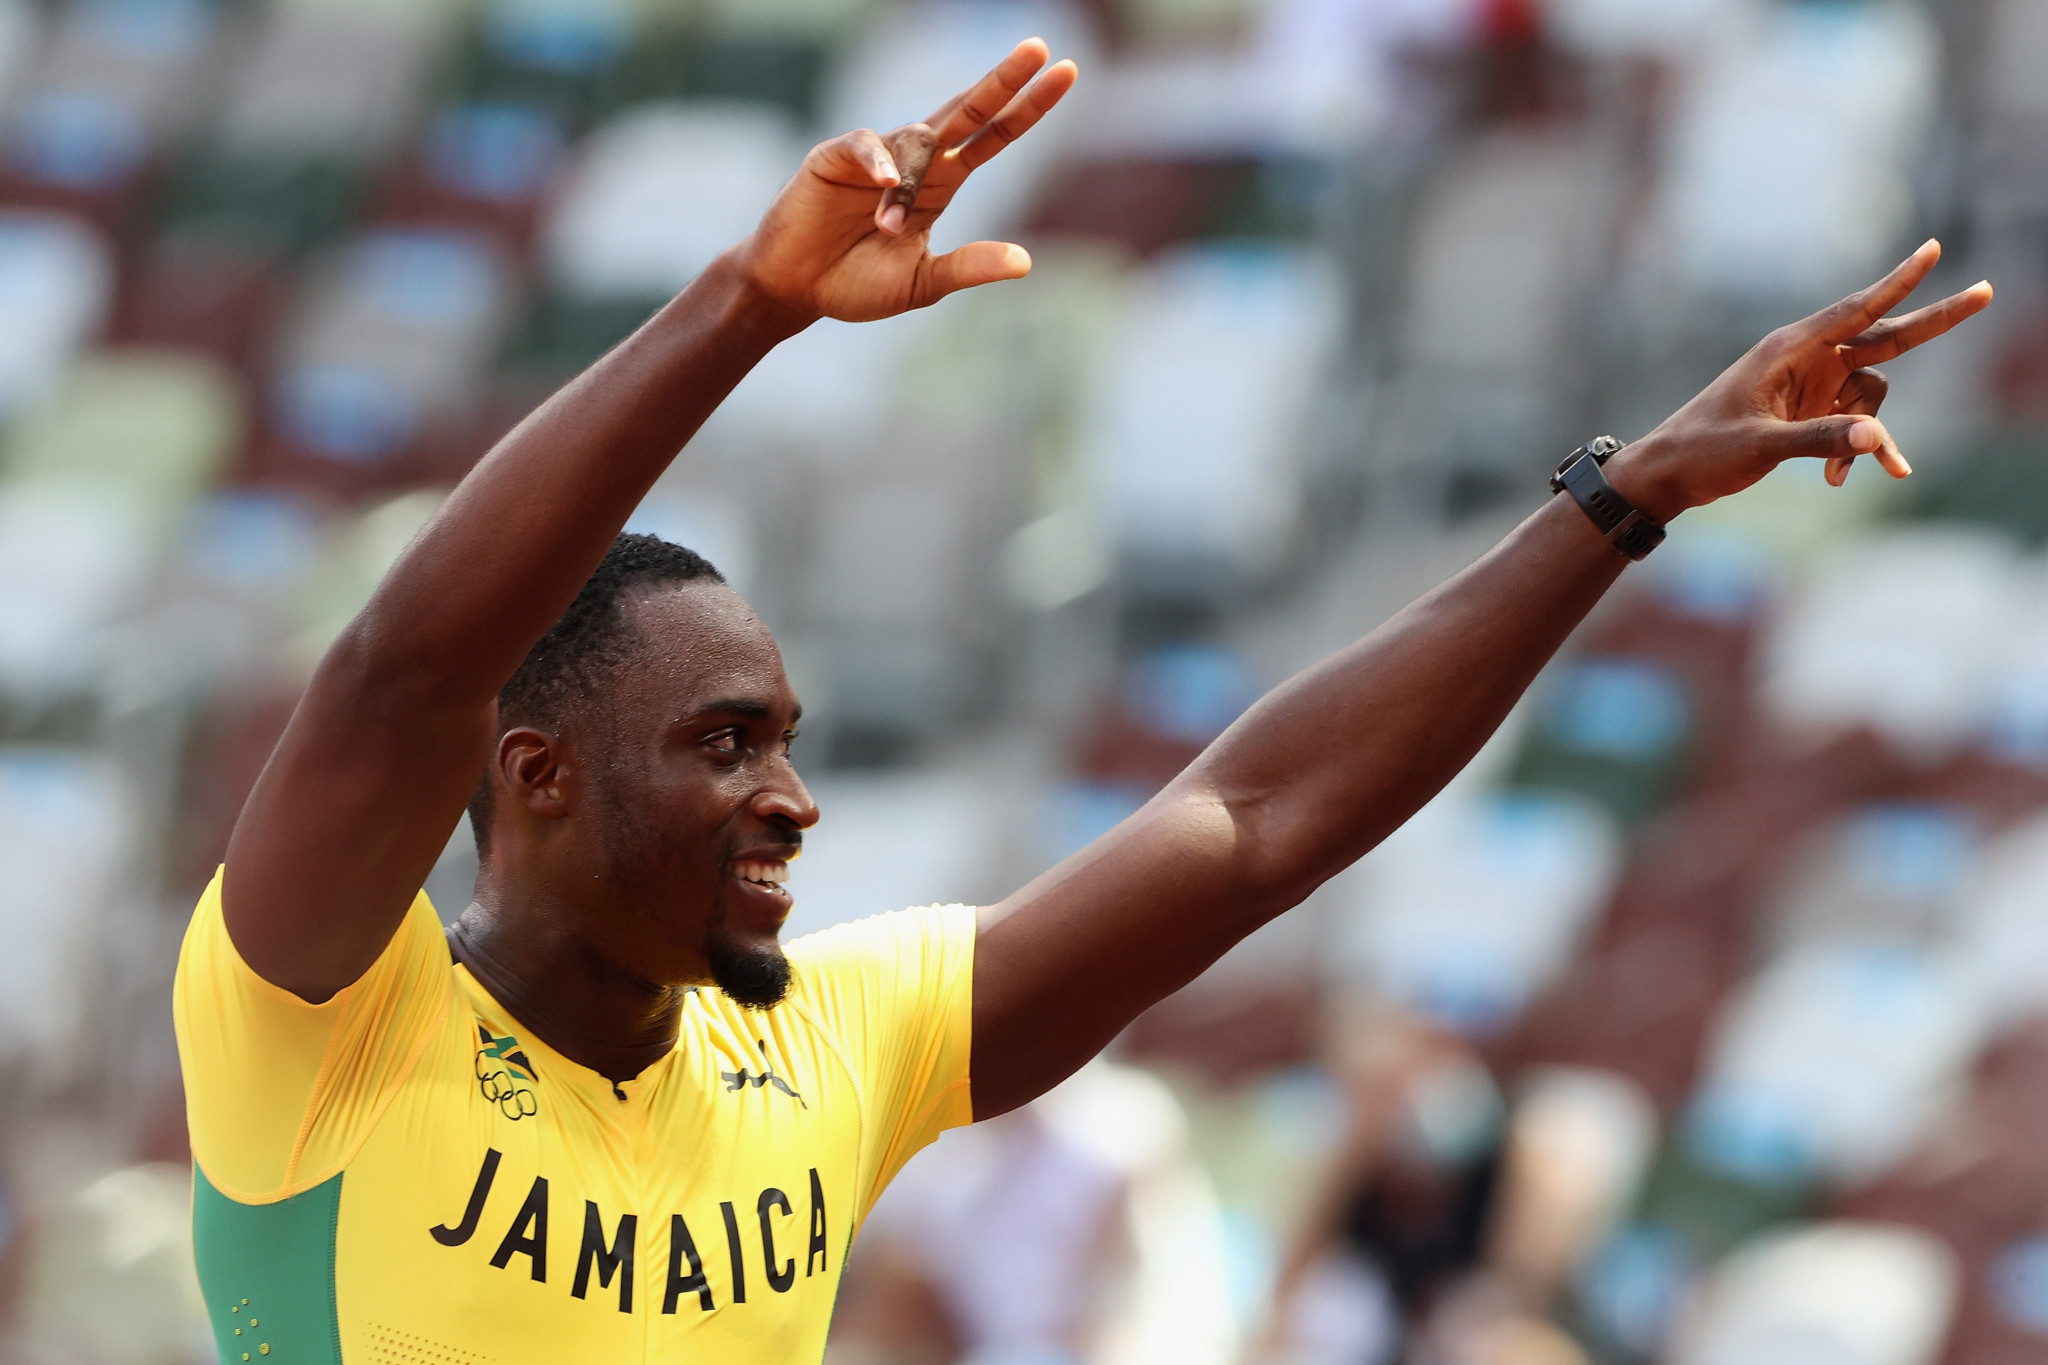 Tokyo 2020 staffer who helped Olympic champion Parchment invited to Jamaica